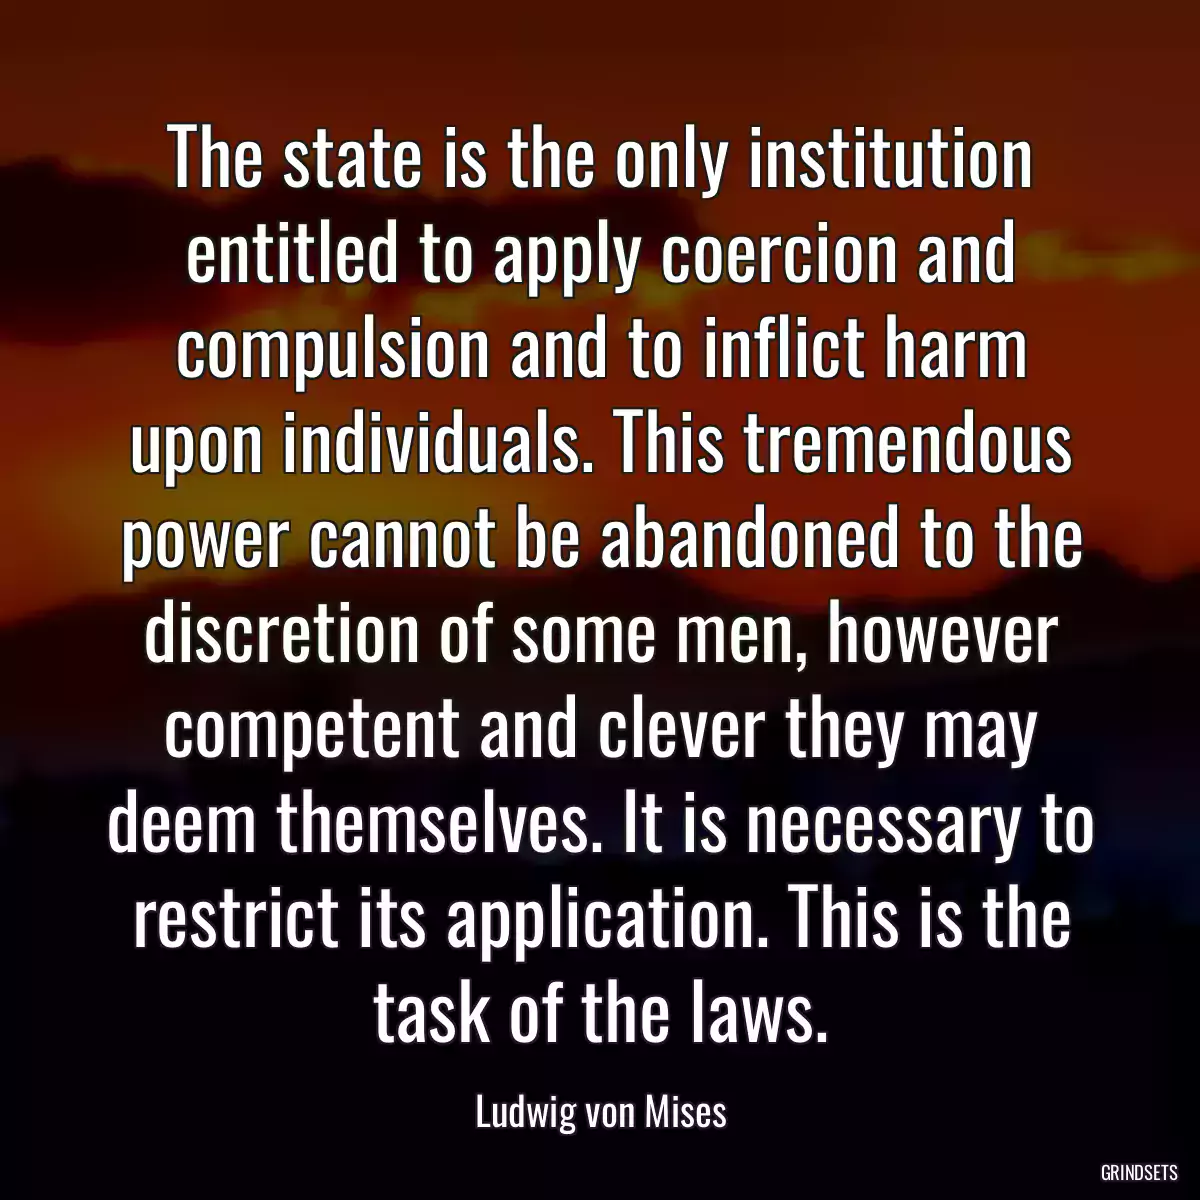 The state is the only institution entitled to apply coercion and compulsion and to inflict harm upon individuals. This tremendous power cannot be abandoned to the discretion of some men, however competent and clever they may deem themselves. It is necessary to restrict its application. This is the task of the laws.